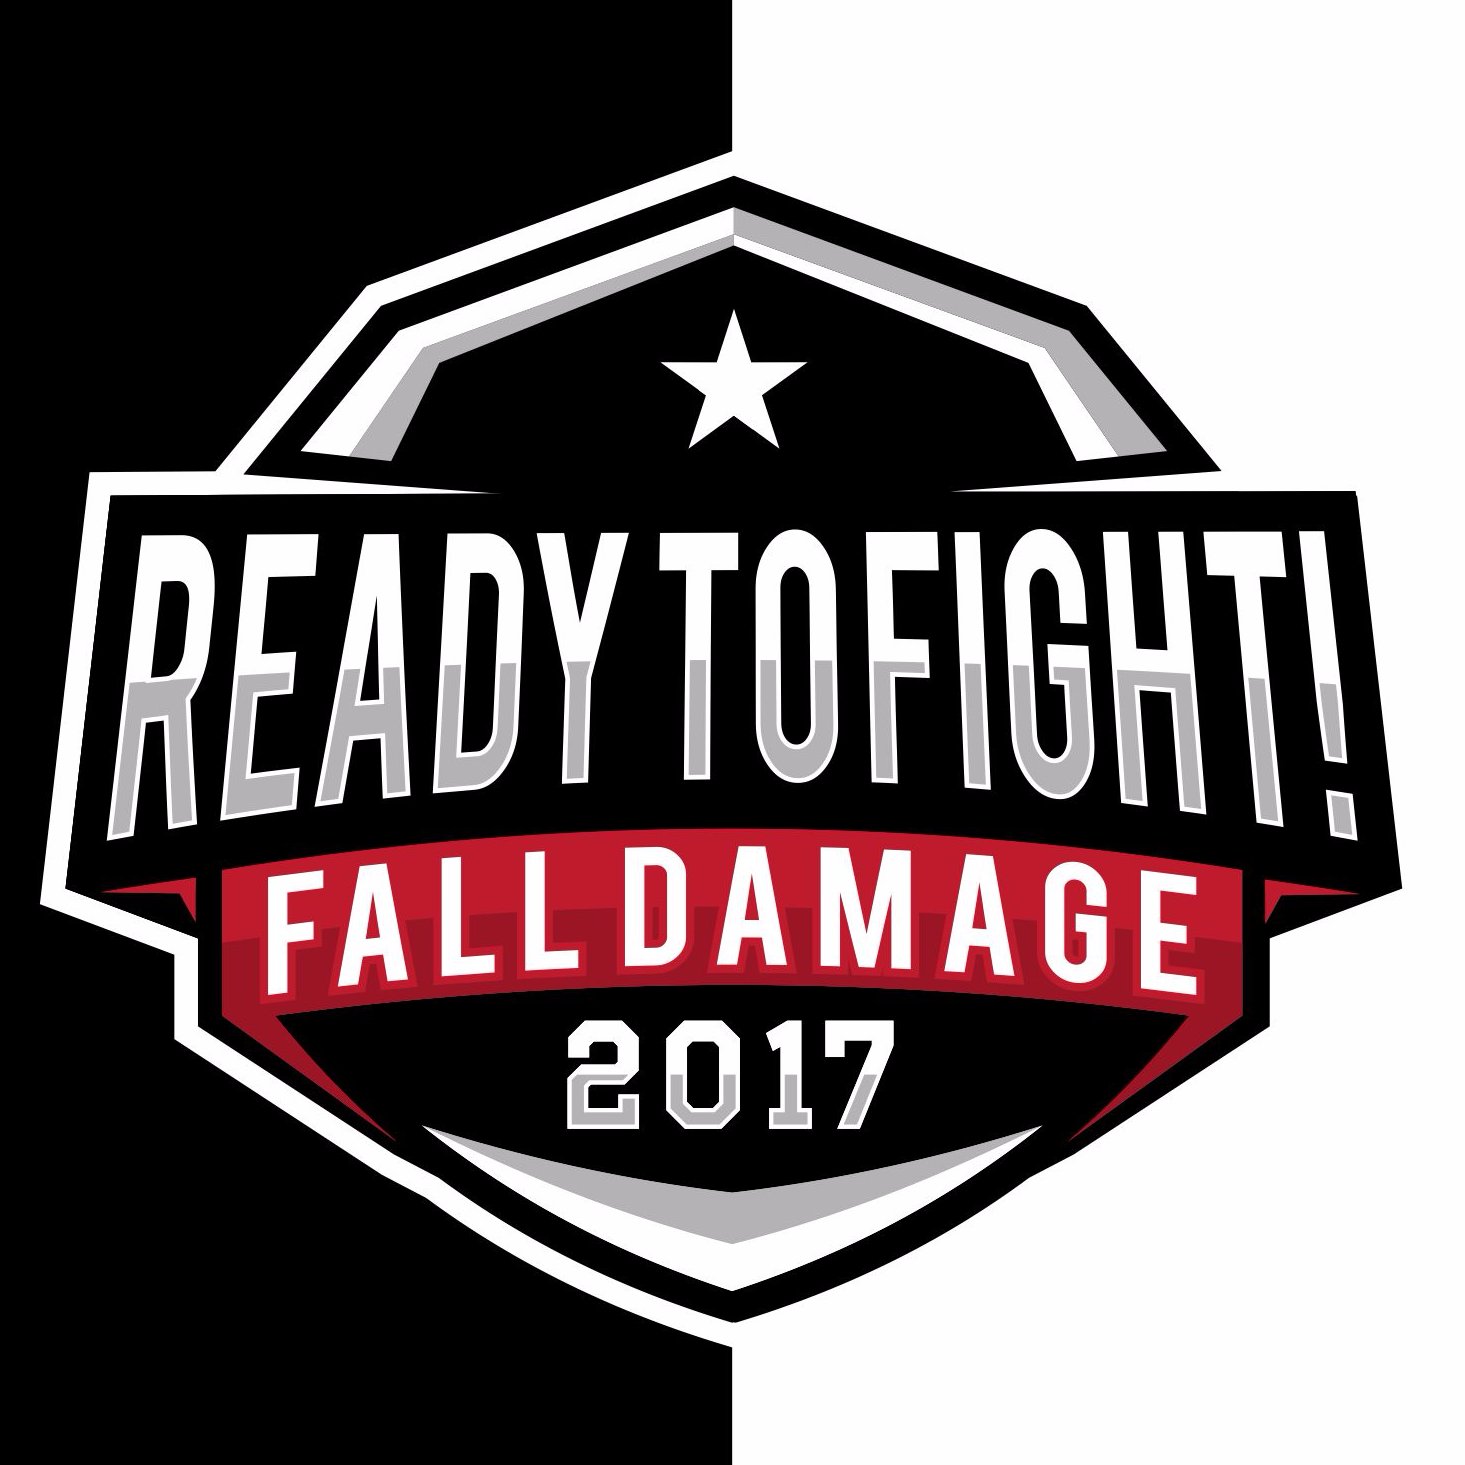 ReadytoFight!: Fall Damage is ReadytoFight!'s premier fall LAN Gaming event held in Western PA. Stay tuned for more details.